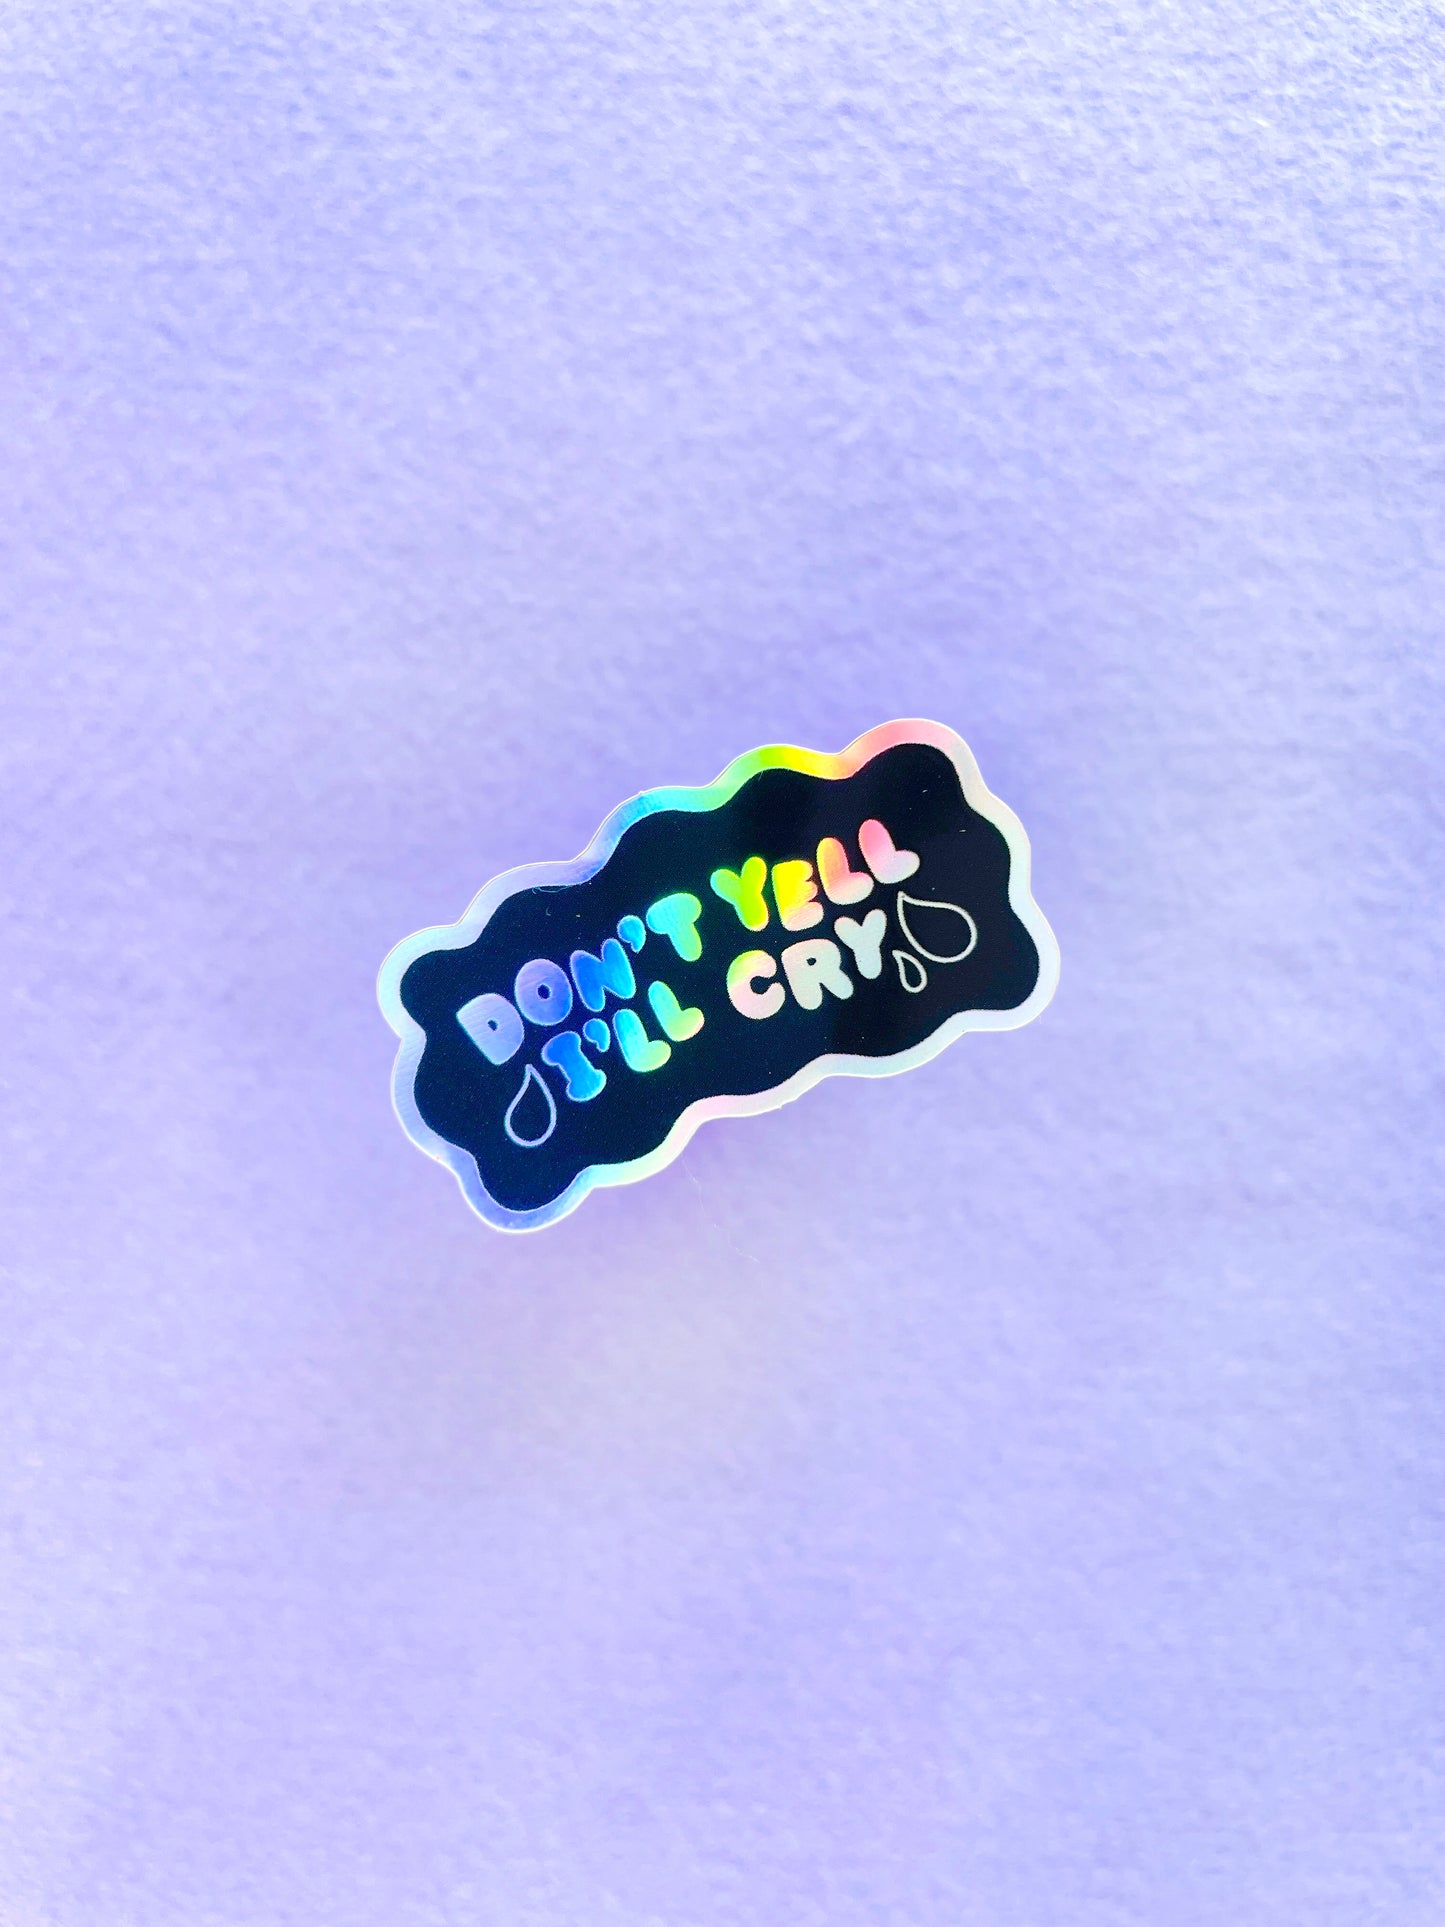 don't yell! holographic sticker